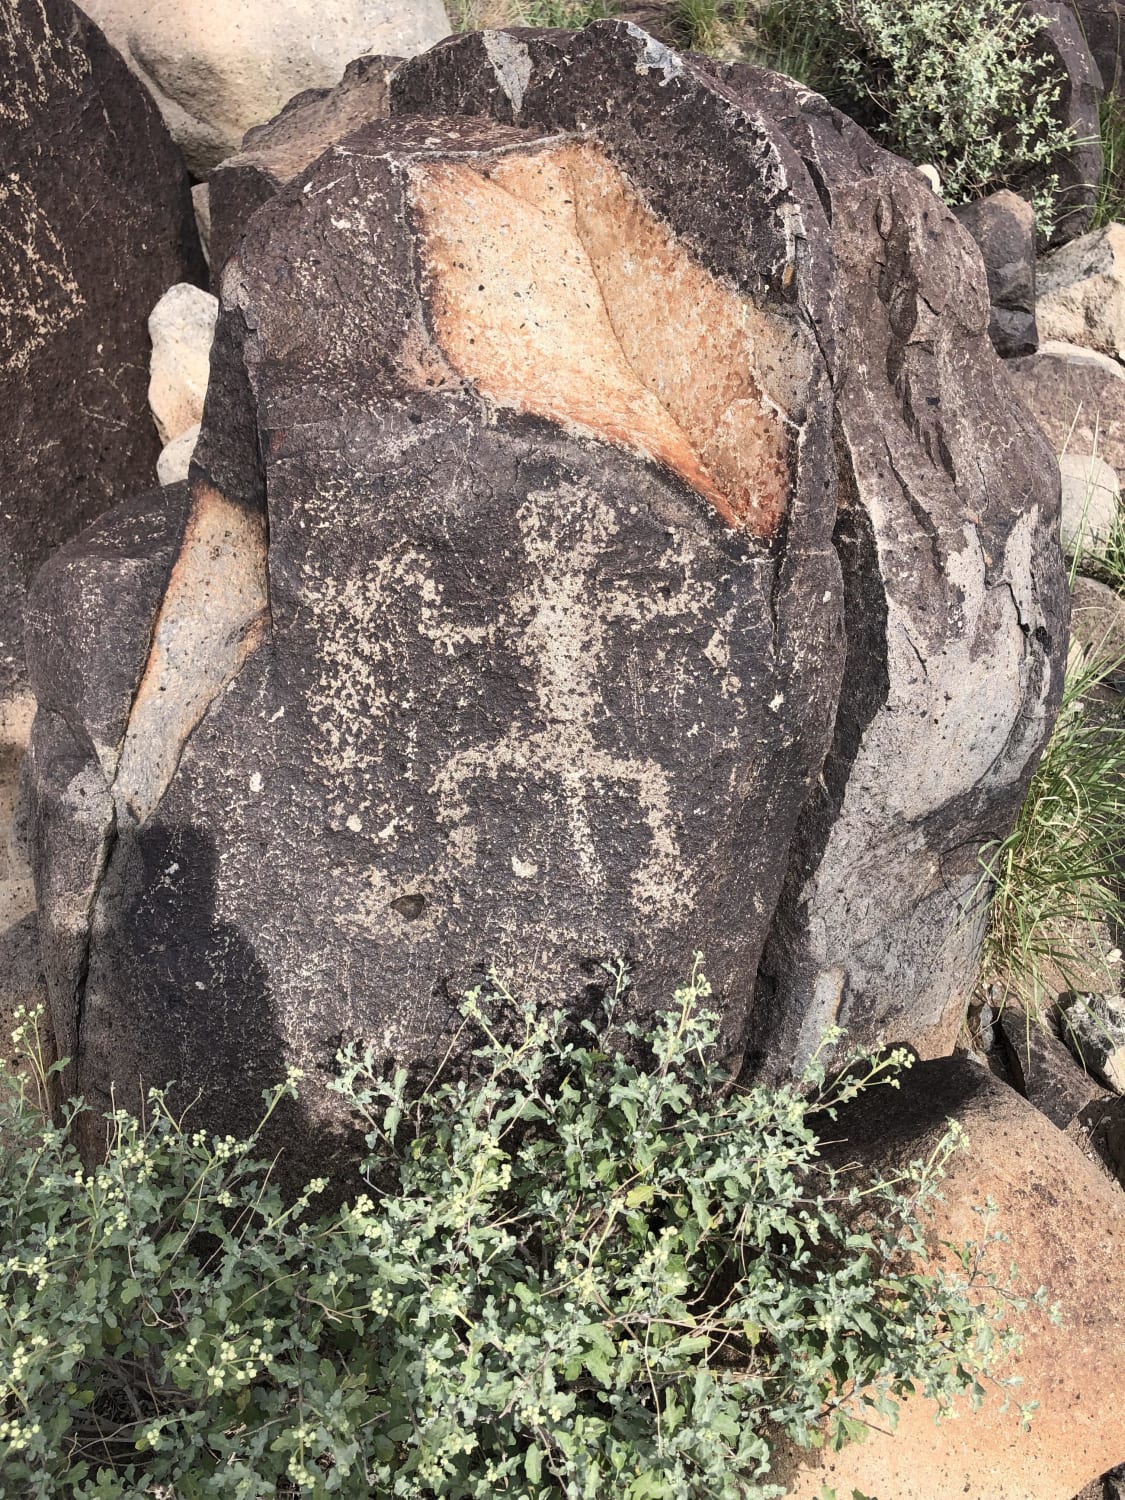 One of the petroglyphs I found at the Three Rivers petroglyph site in New Mexico.